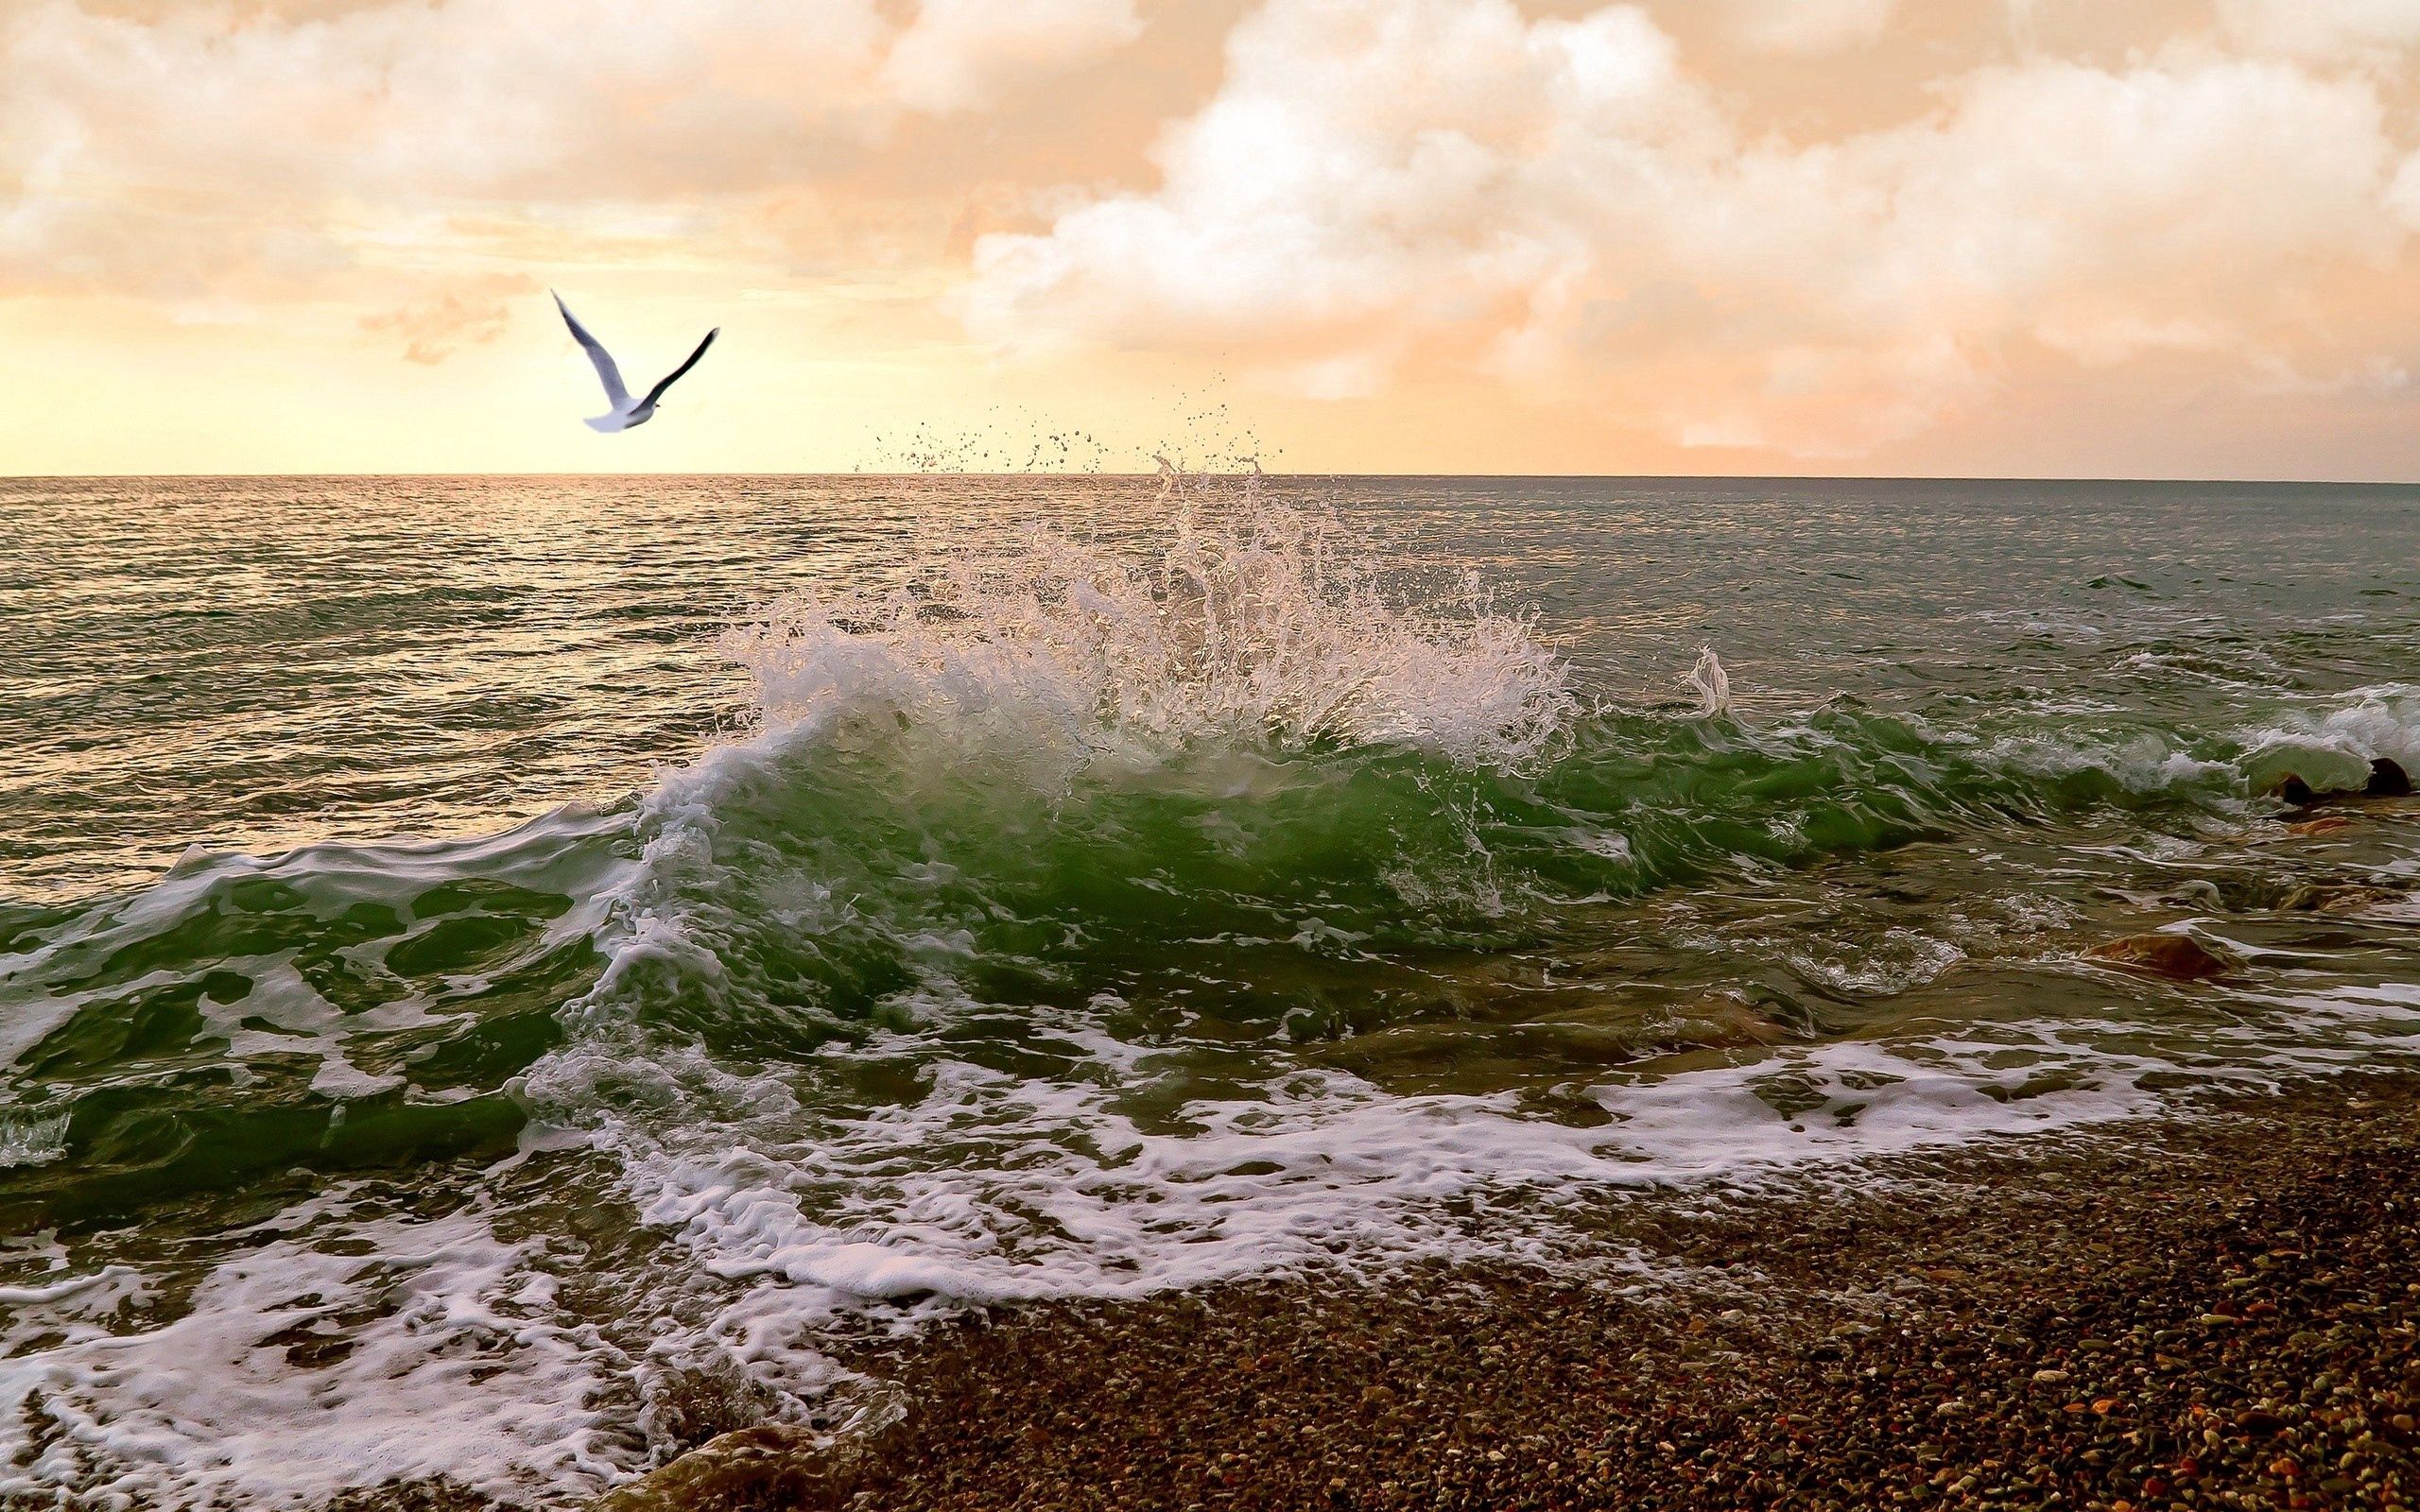 Download PC Wallpaper nature, sky, sea, waves, gull, seagull, surf